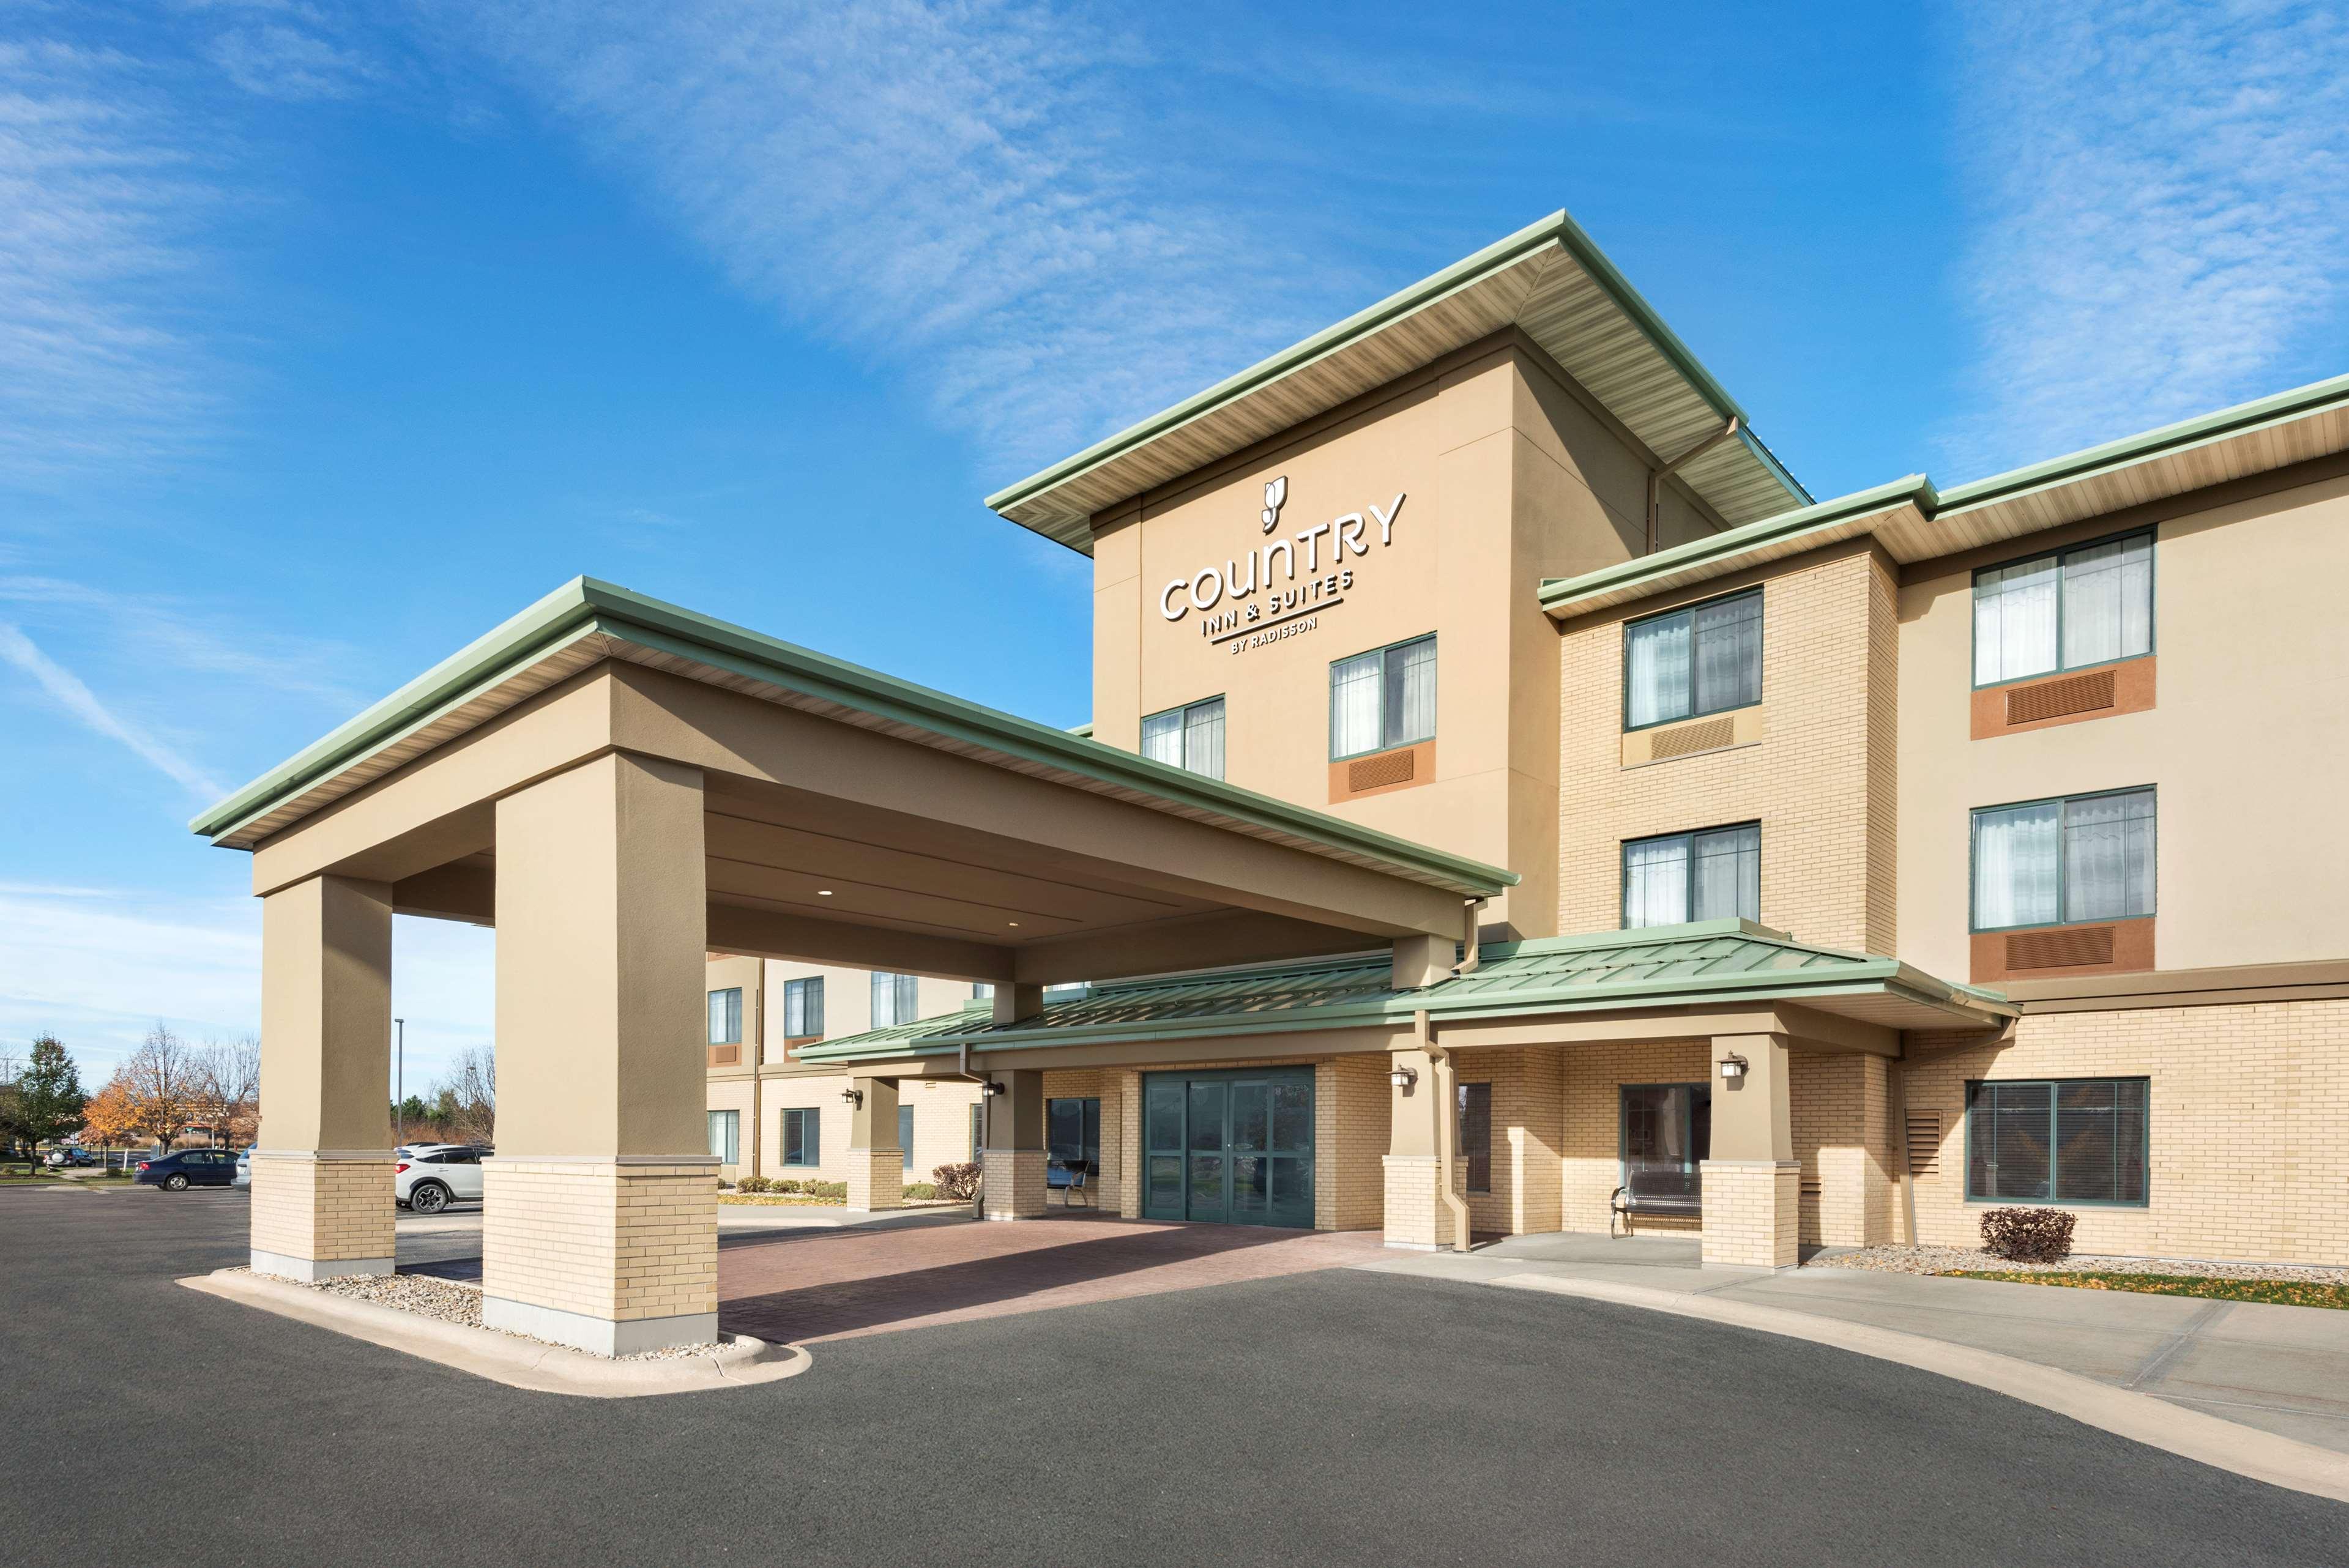 Country Inn & Suites, Madison West